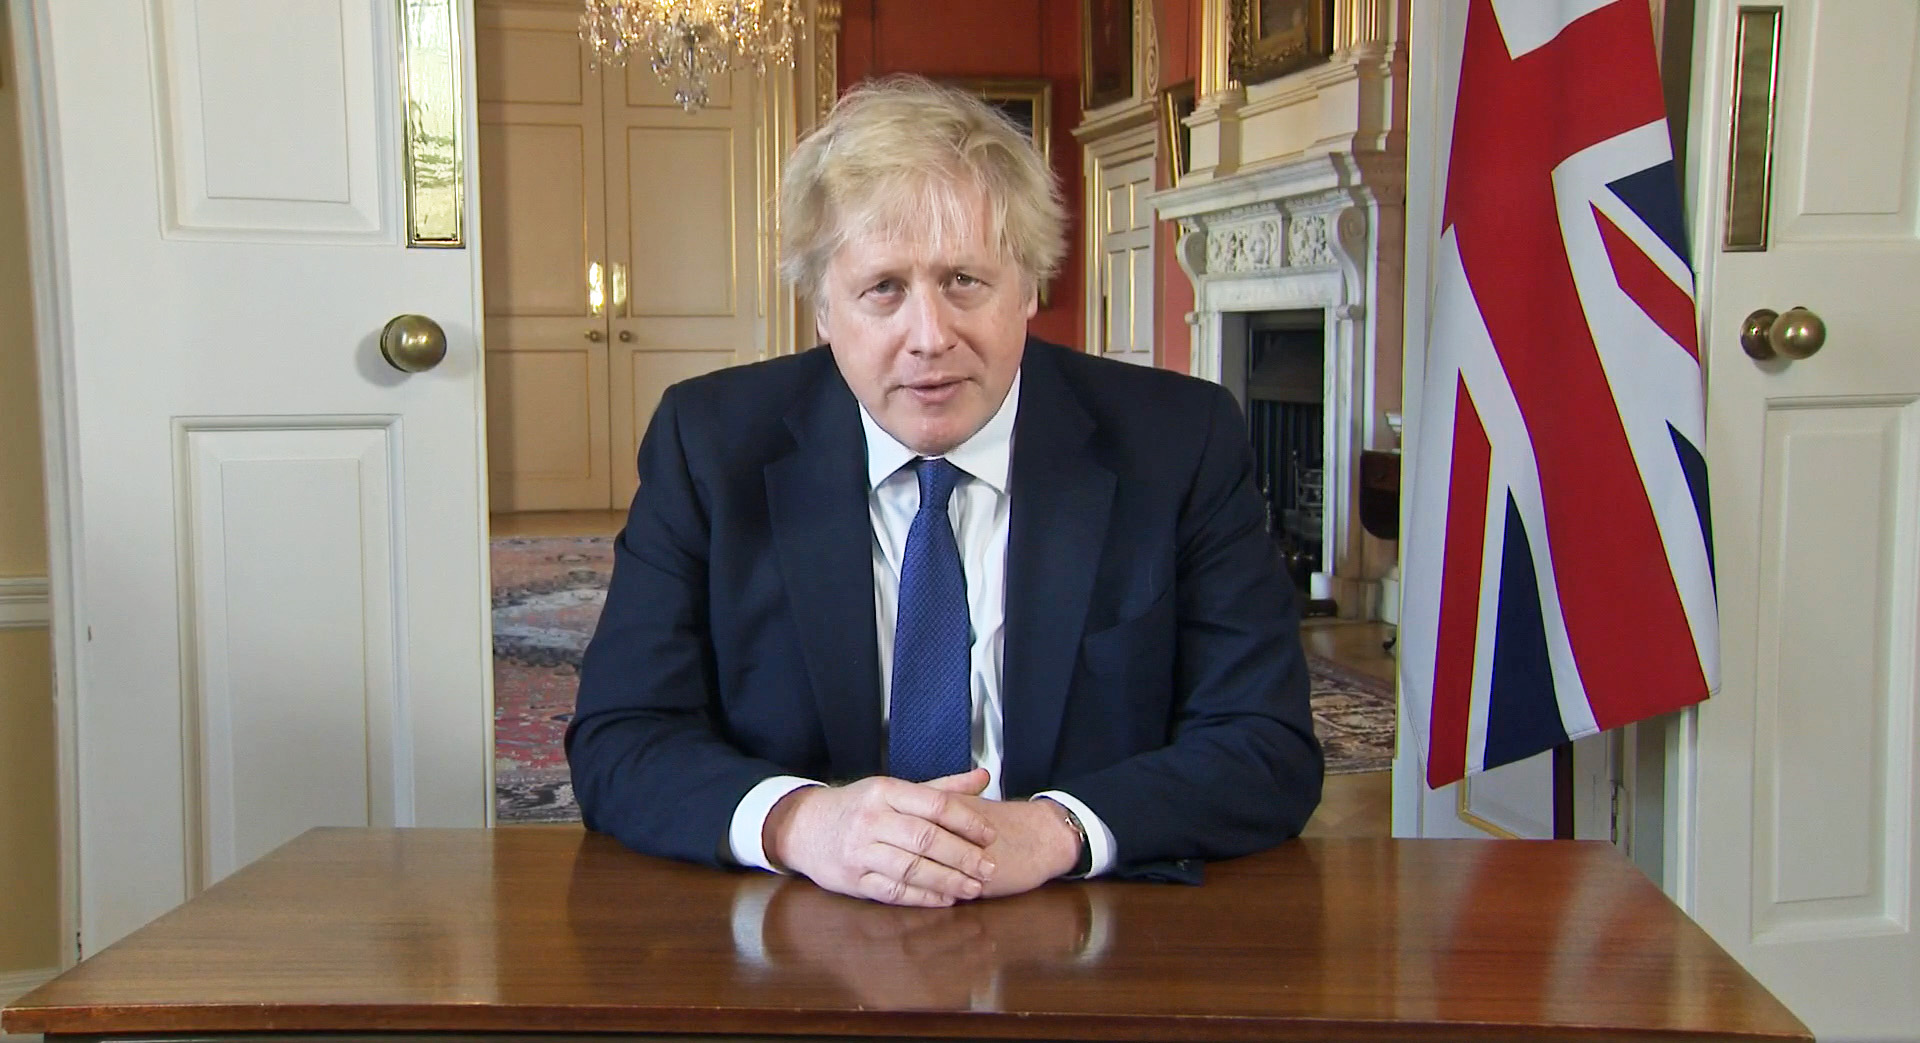 A TV grab of Prime Minister Boris Johnson making a speech from Downing Street, London, in the aftermath of the Russian invasion of Ukraine on February 24.